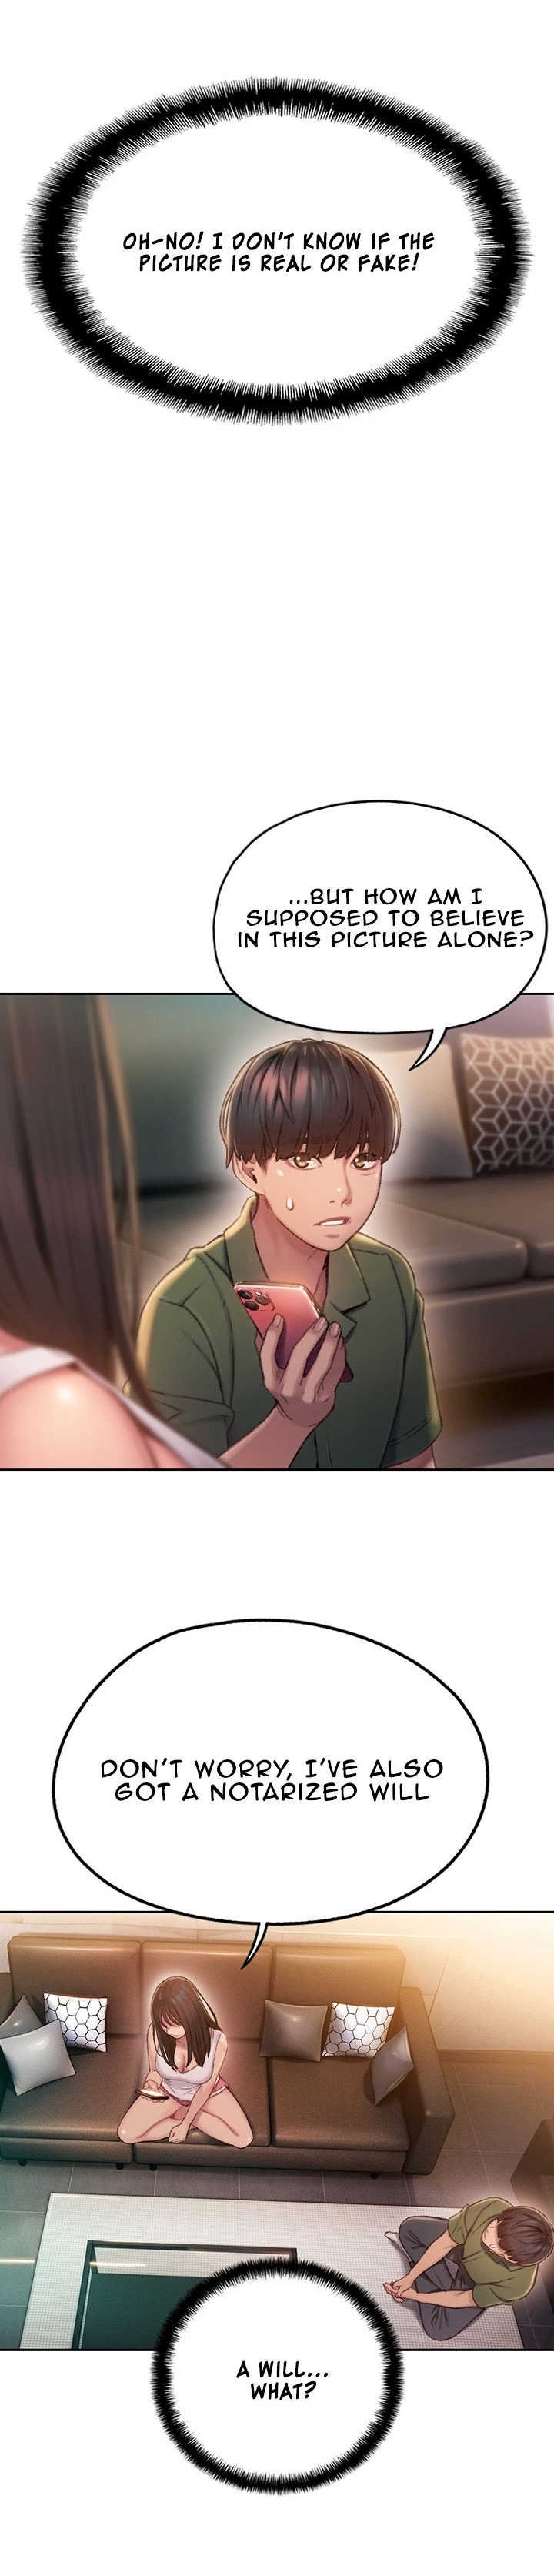 [Park Hyeongjun] Love Limit Exceeded V.2 (01-09) (Ongoing) - Page 39